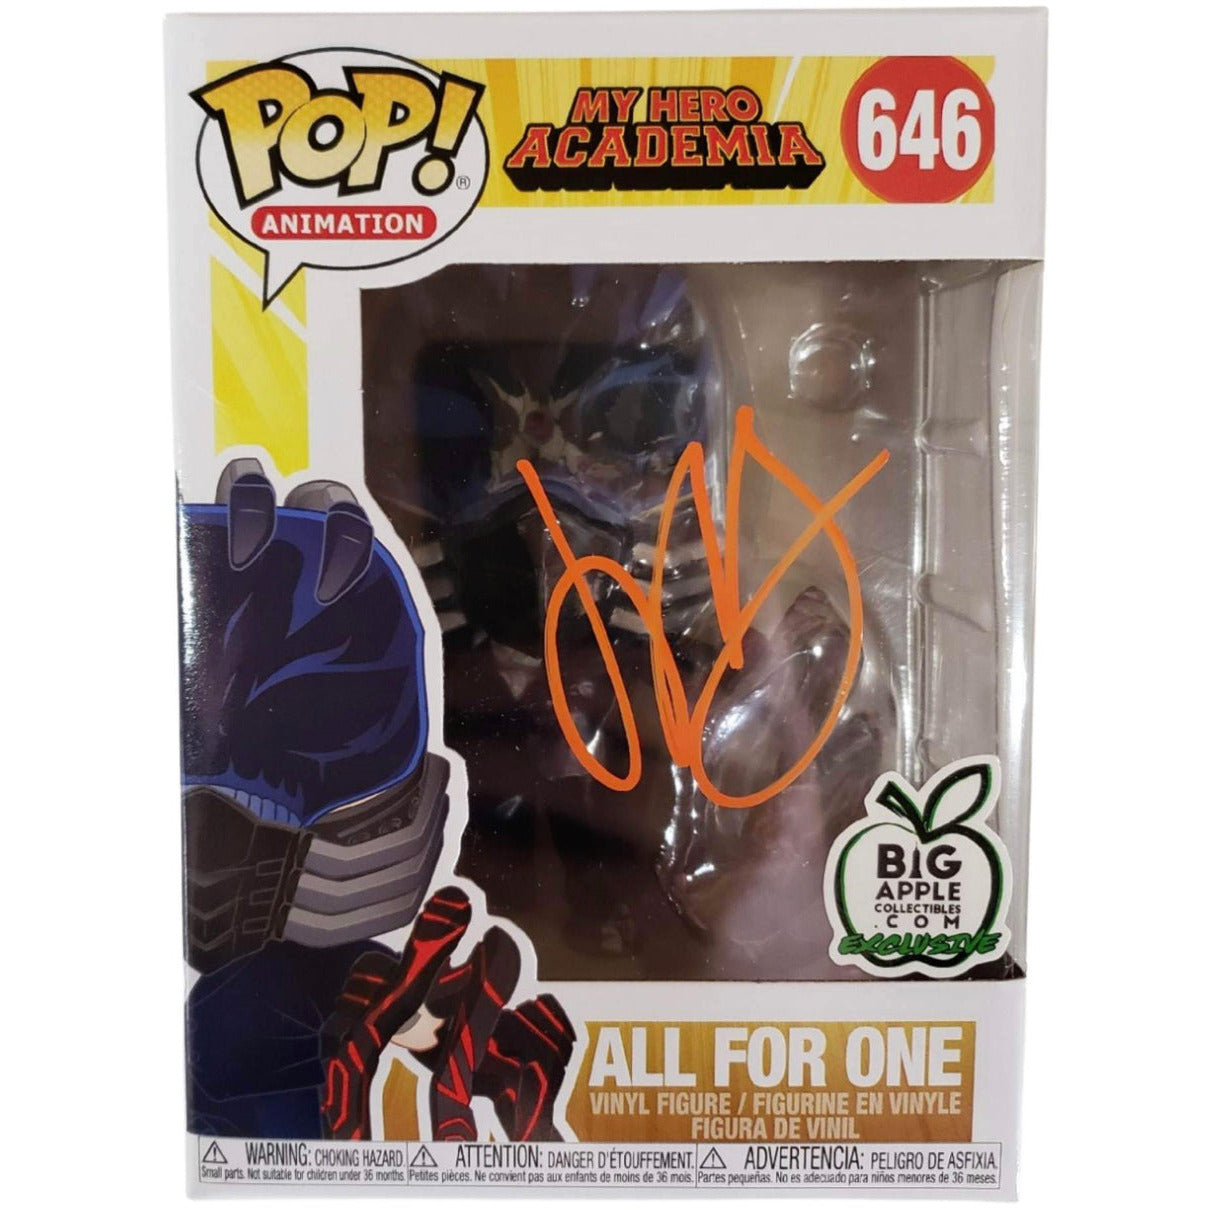 FUNKO POP! SIGNED ALL FOR ONE JOHN SWASEY MY HERO ACADEMIA #646 IN STOCK